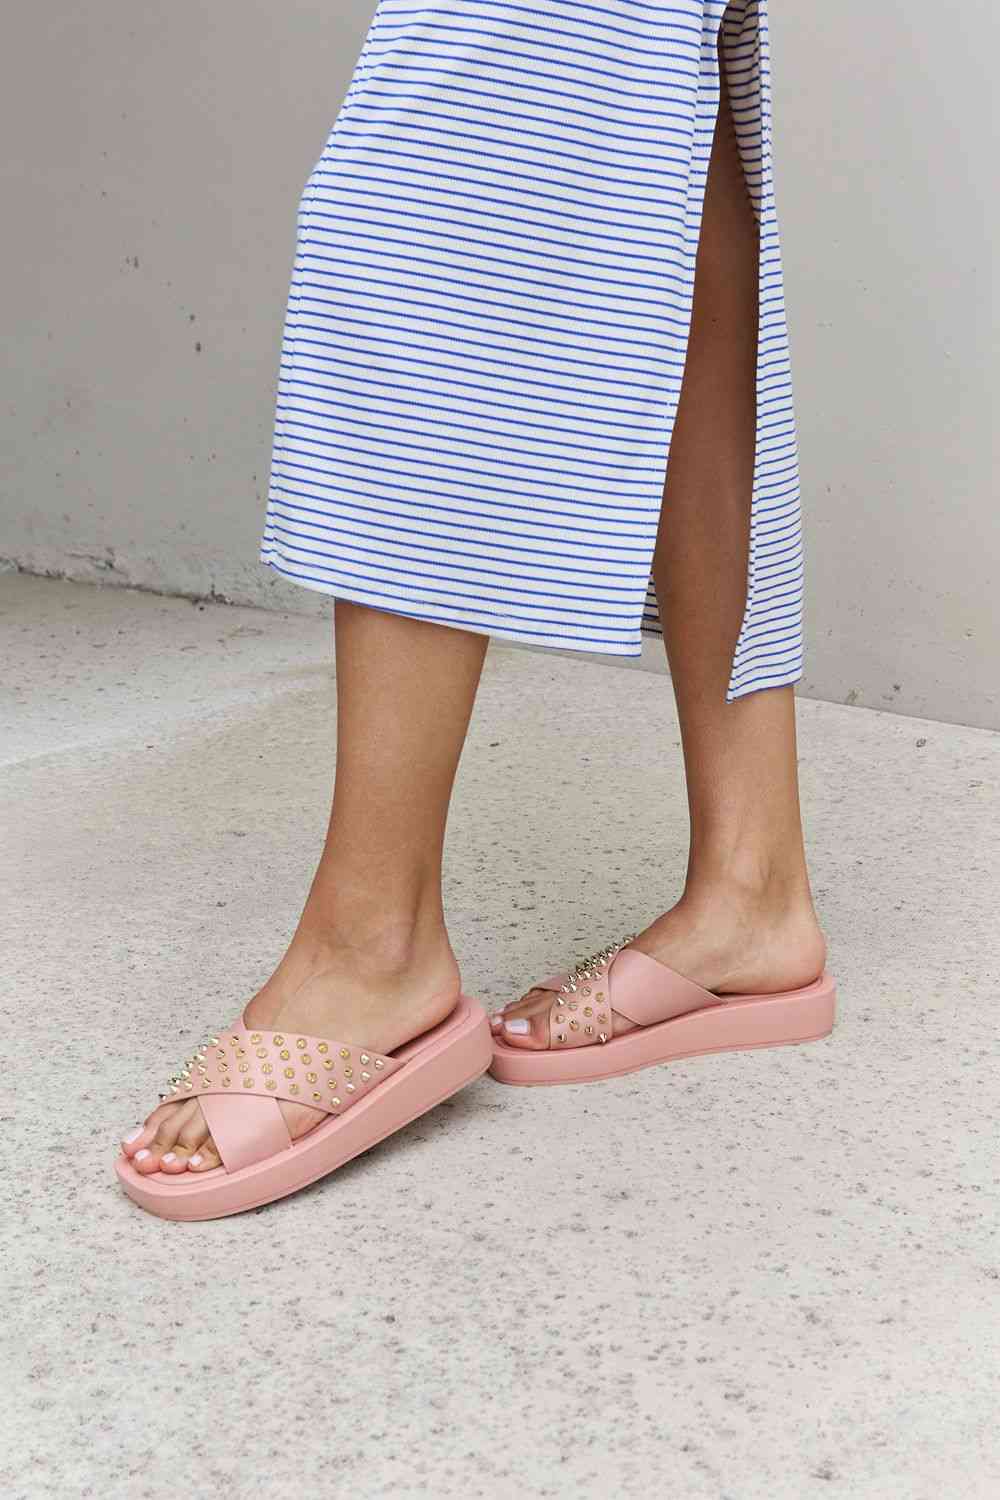 Studded Cross Strap Sandals in Blush - Kawaii Stop - Chic Fashion, Cross Strap Design, Faux Leather, Flat Heels, Flats, Forever Link, Modern Elegance, Ship from USA, Slippers, Stylish Comfort